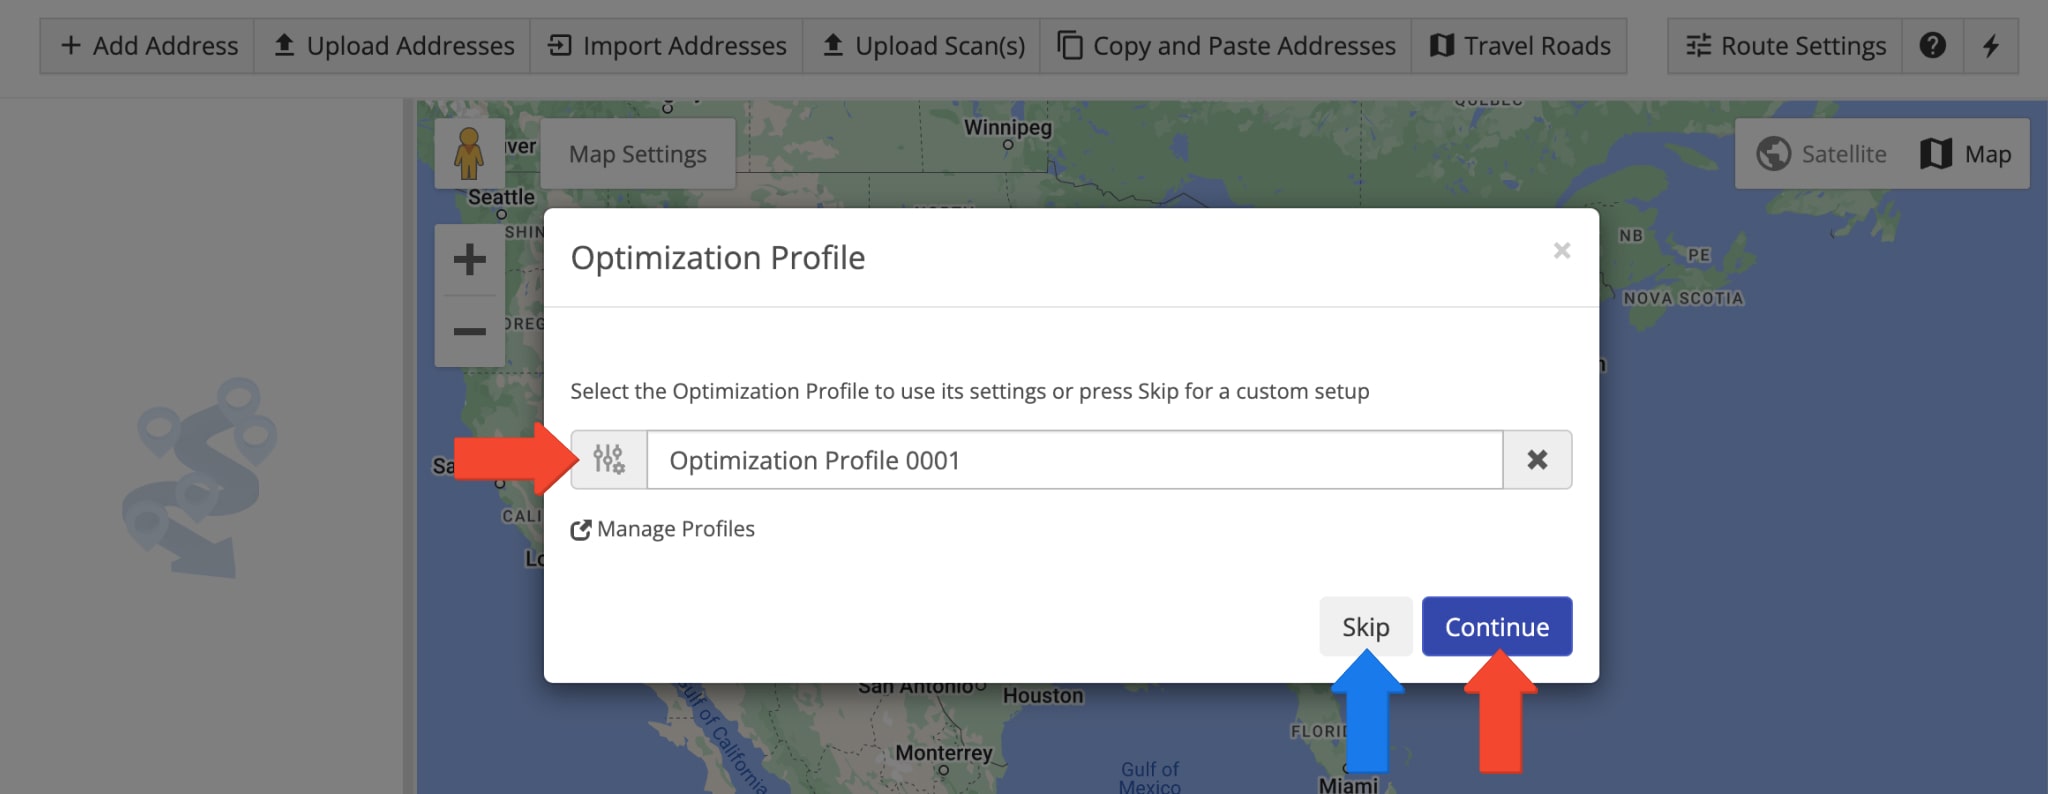 Select the preferred optimization profile for planning and optimizing routes with delivery orders.